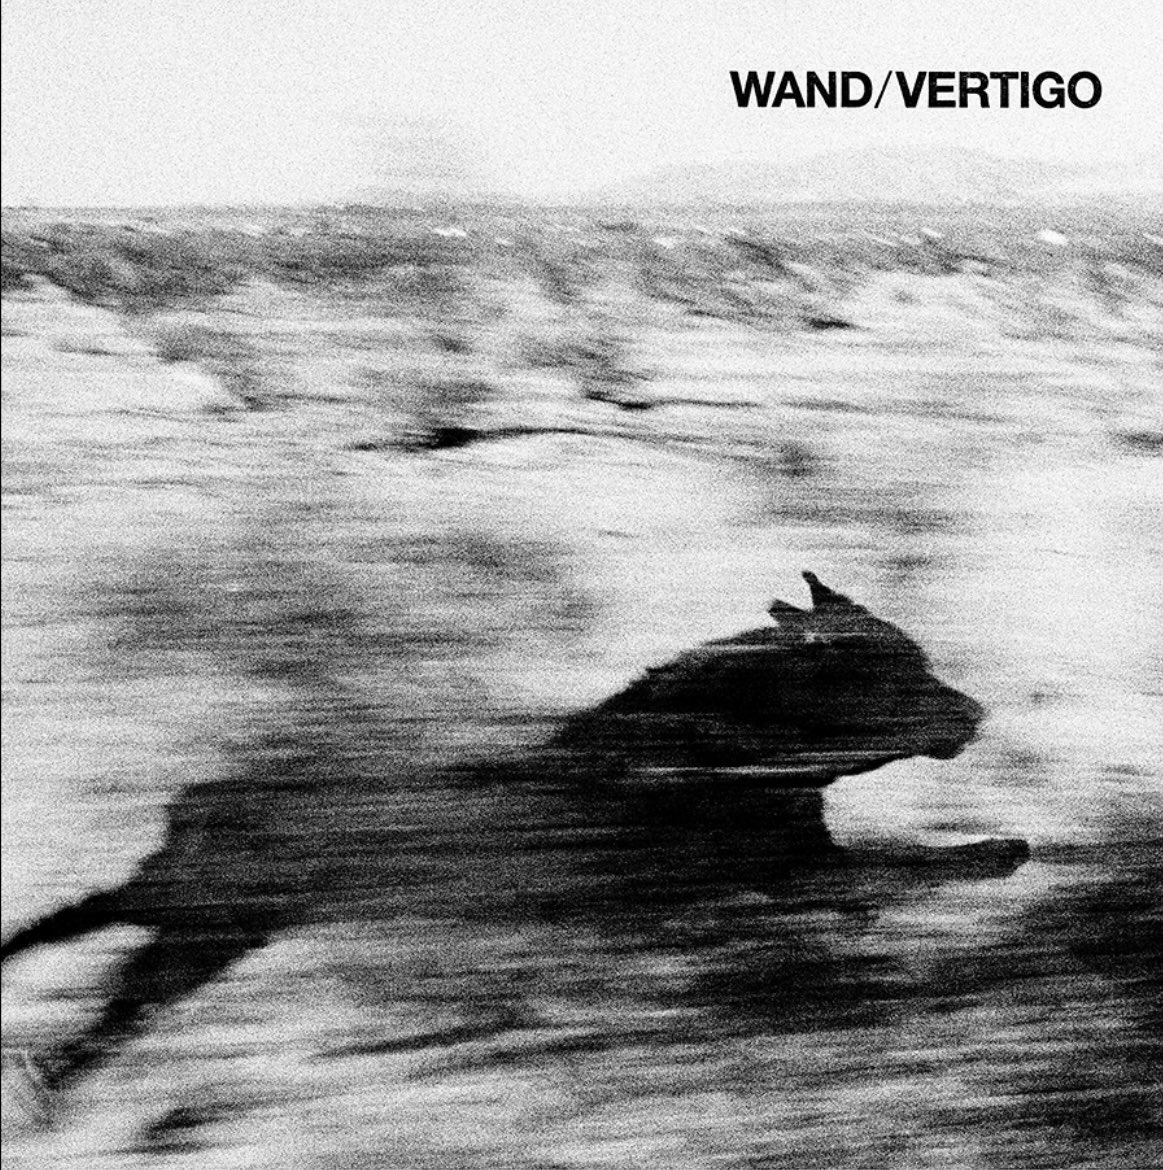 Wand LP 6 “Vertigo” is out July 26th on @dragcityrecords. Listen to the first single “Smile” below, and watch the video by Connor Clarke. You can listen and pre-order the record here 👇 wand.lnk.to/smile